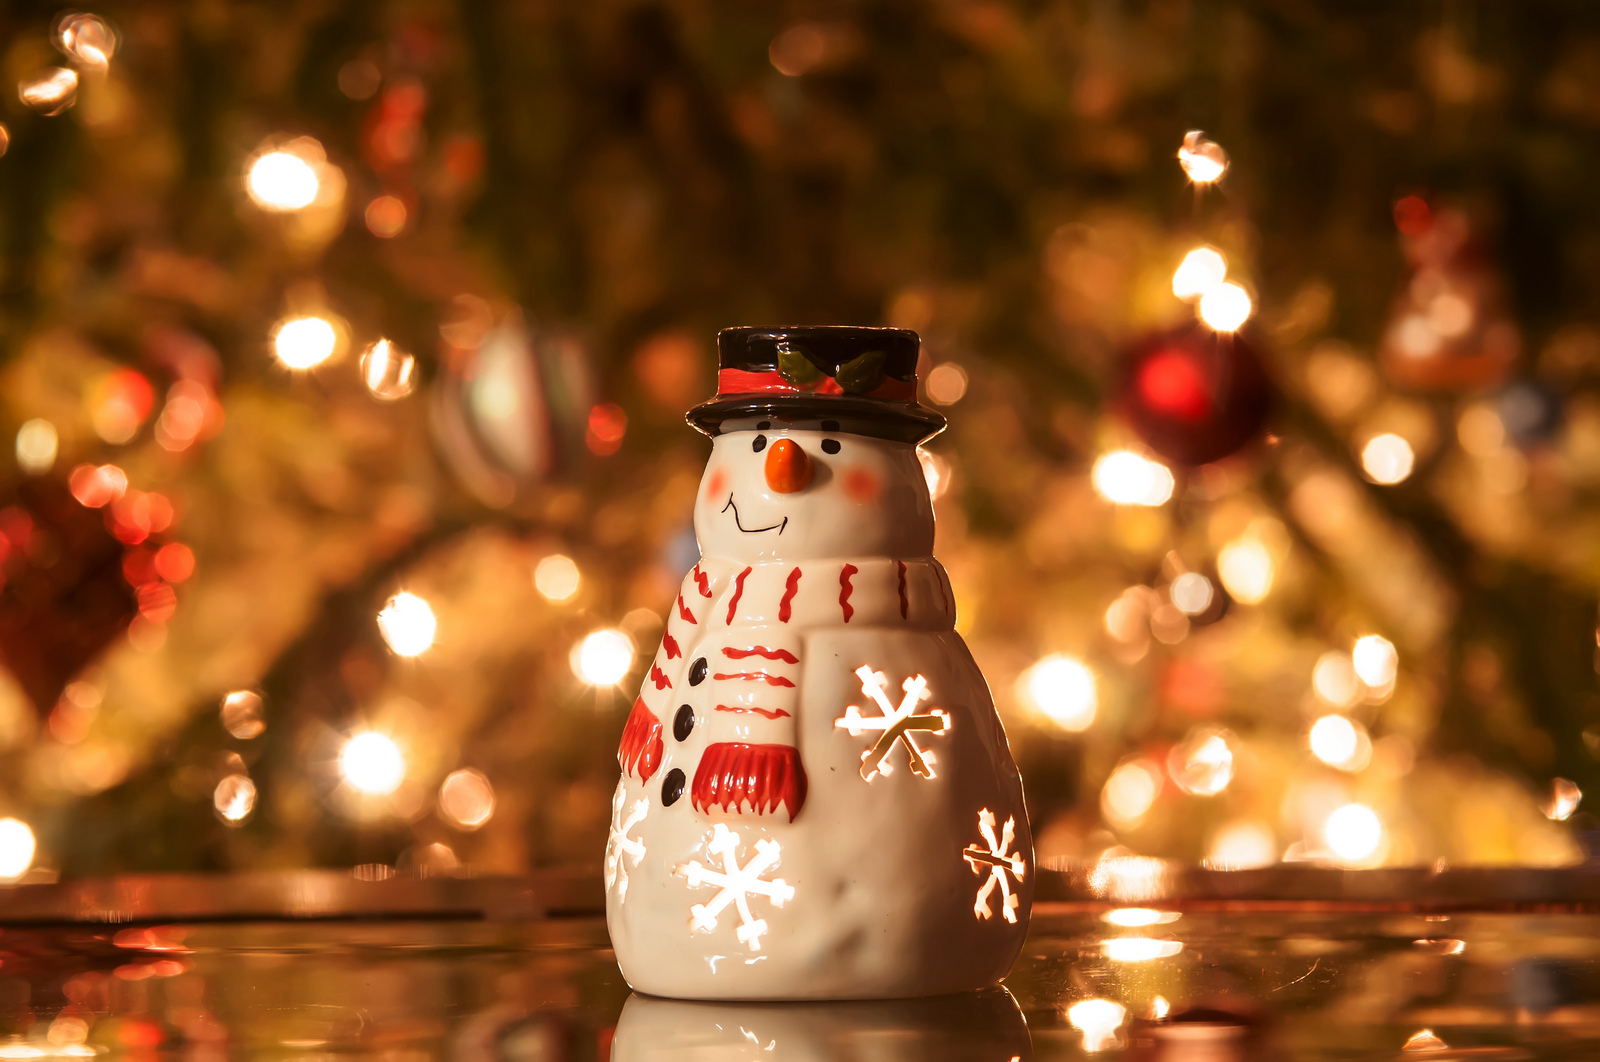 File:Christmas candle snowman with lights.jpg - Wikimedia Commons